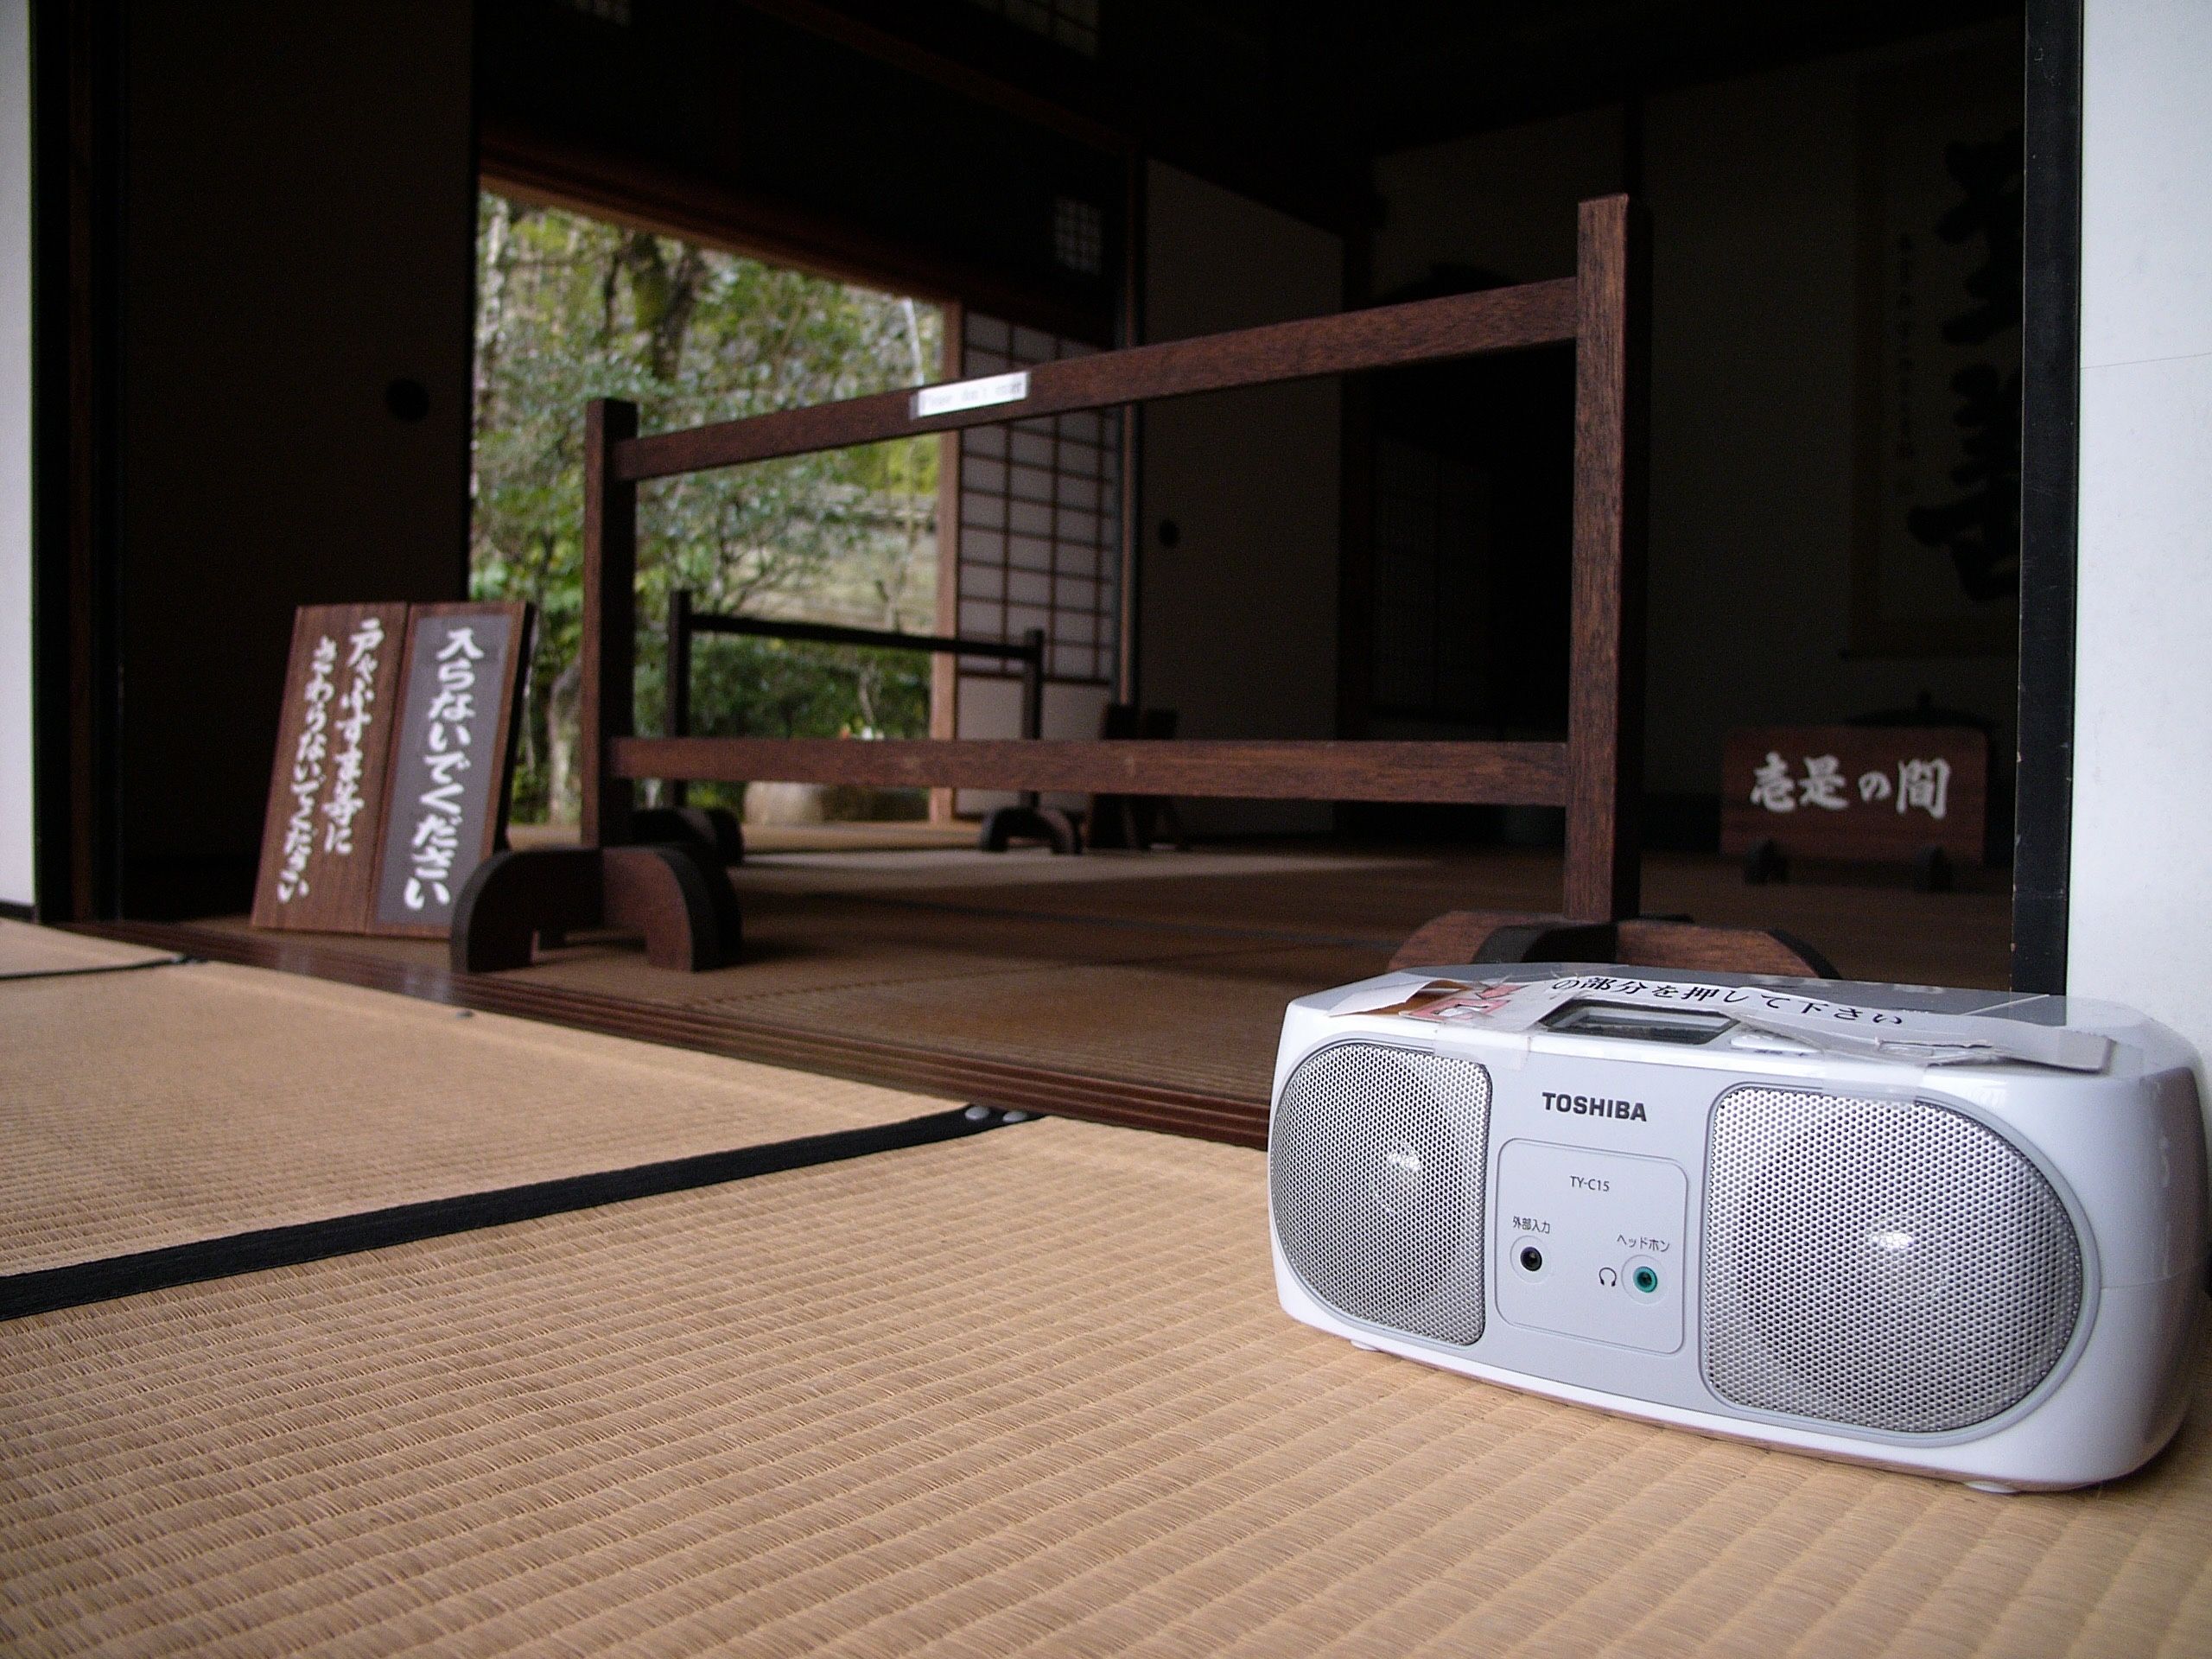 An old Toshiba CD player on a tatami mat.